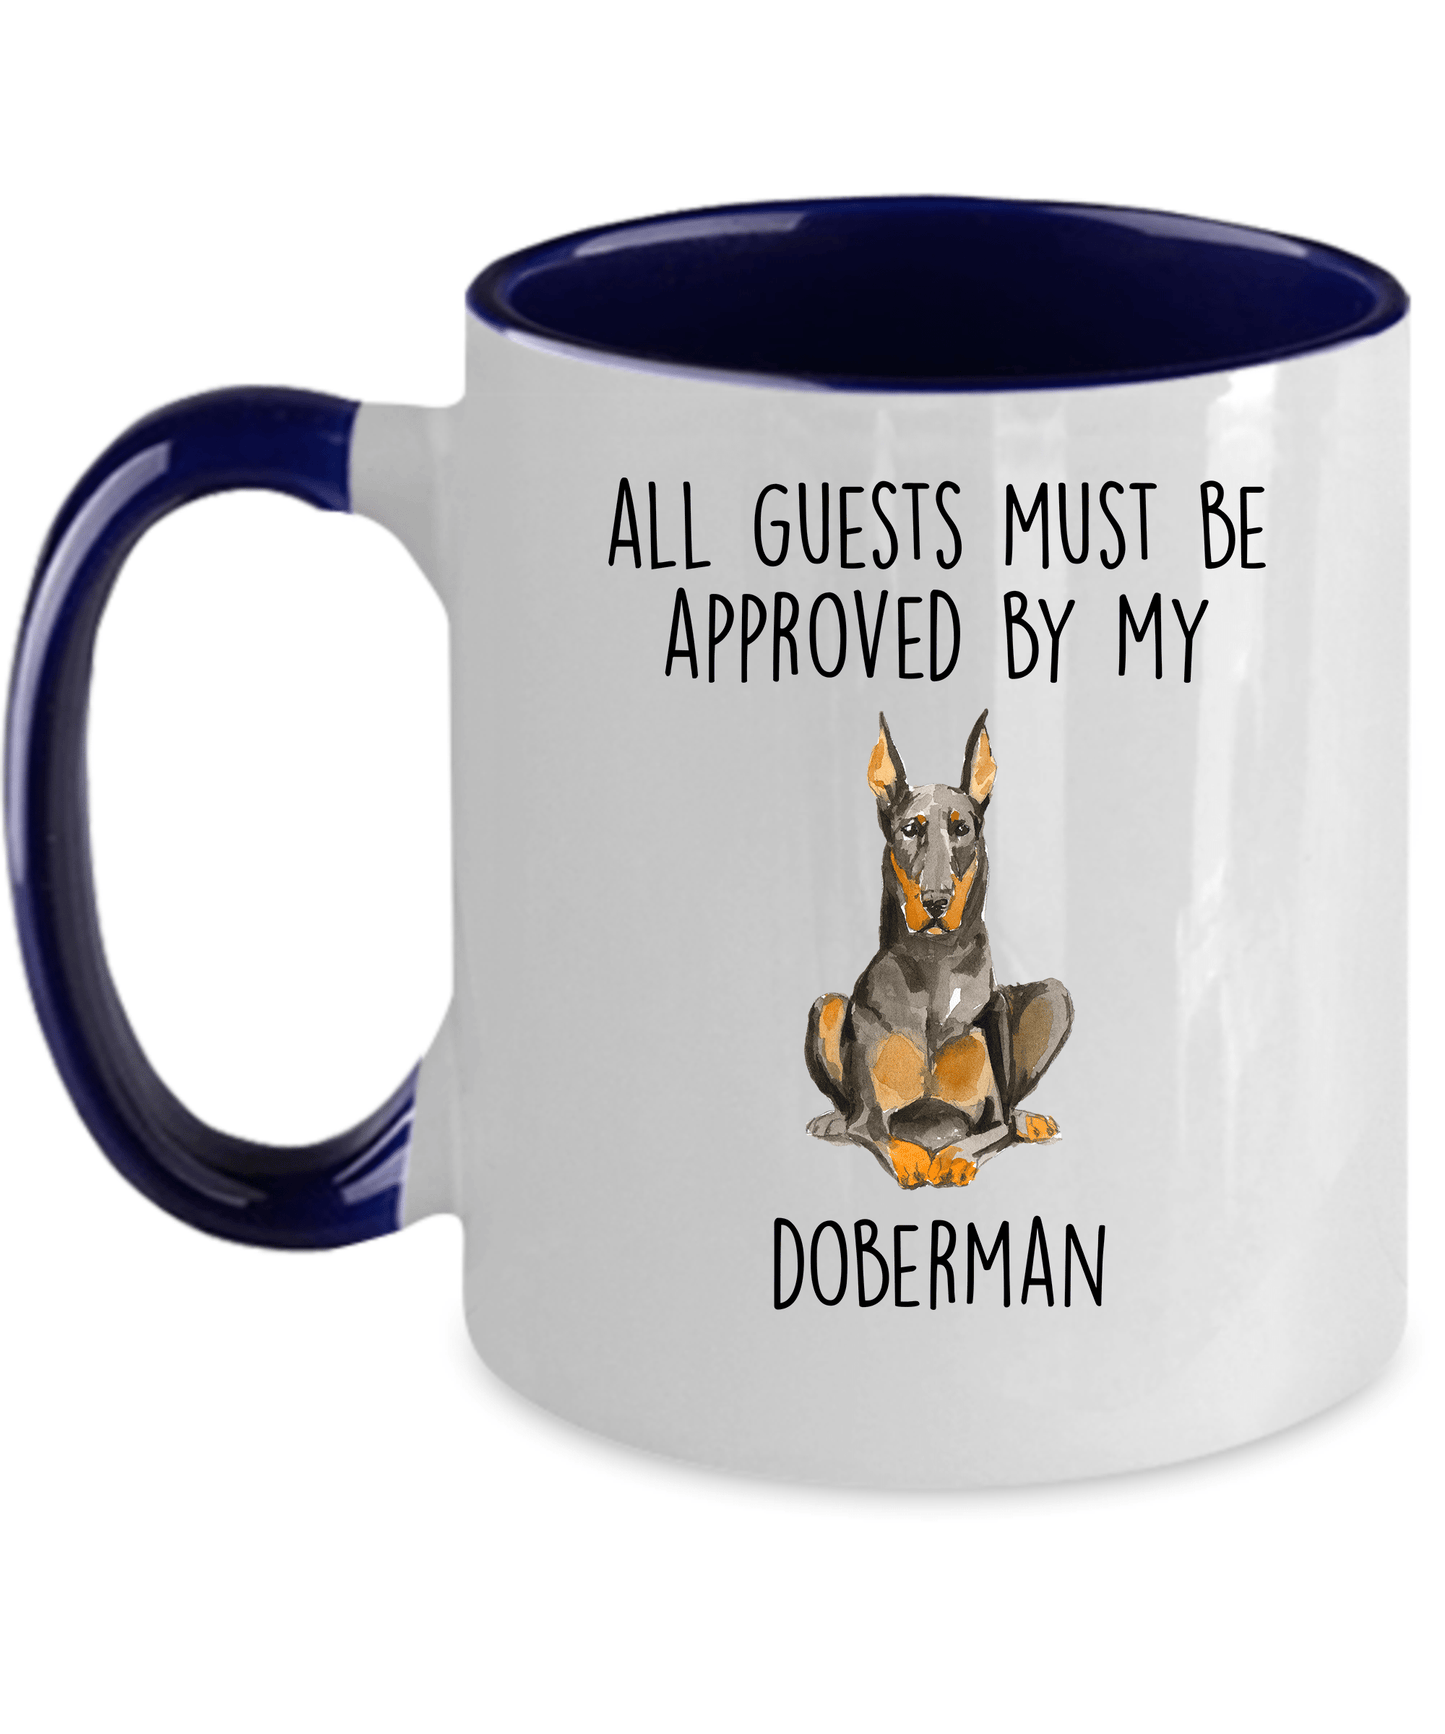 Doberman Pinscher Funny Dog Ceramic Coffee Mug All Guests must be approved